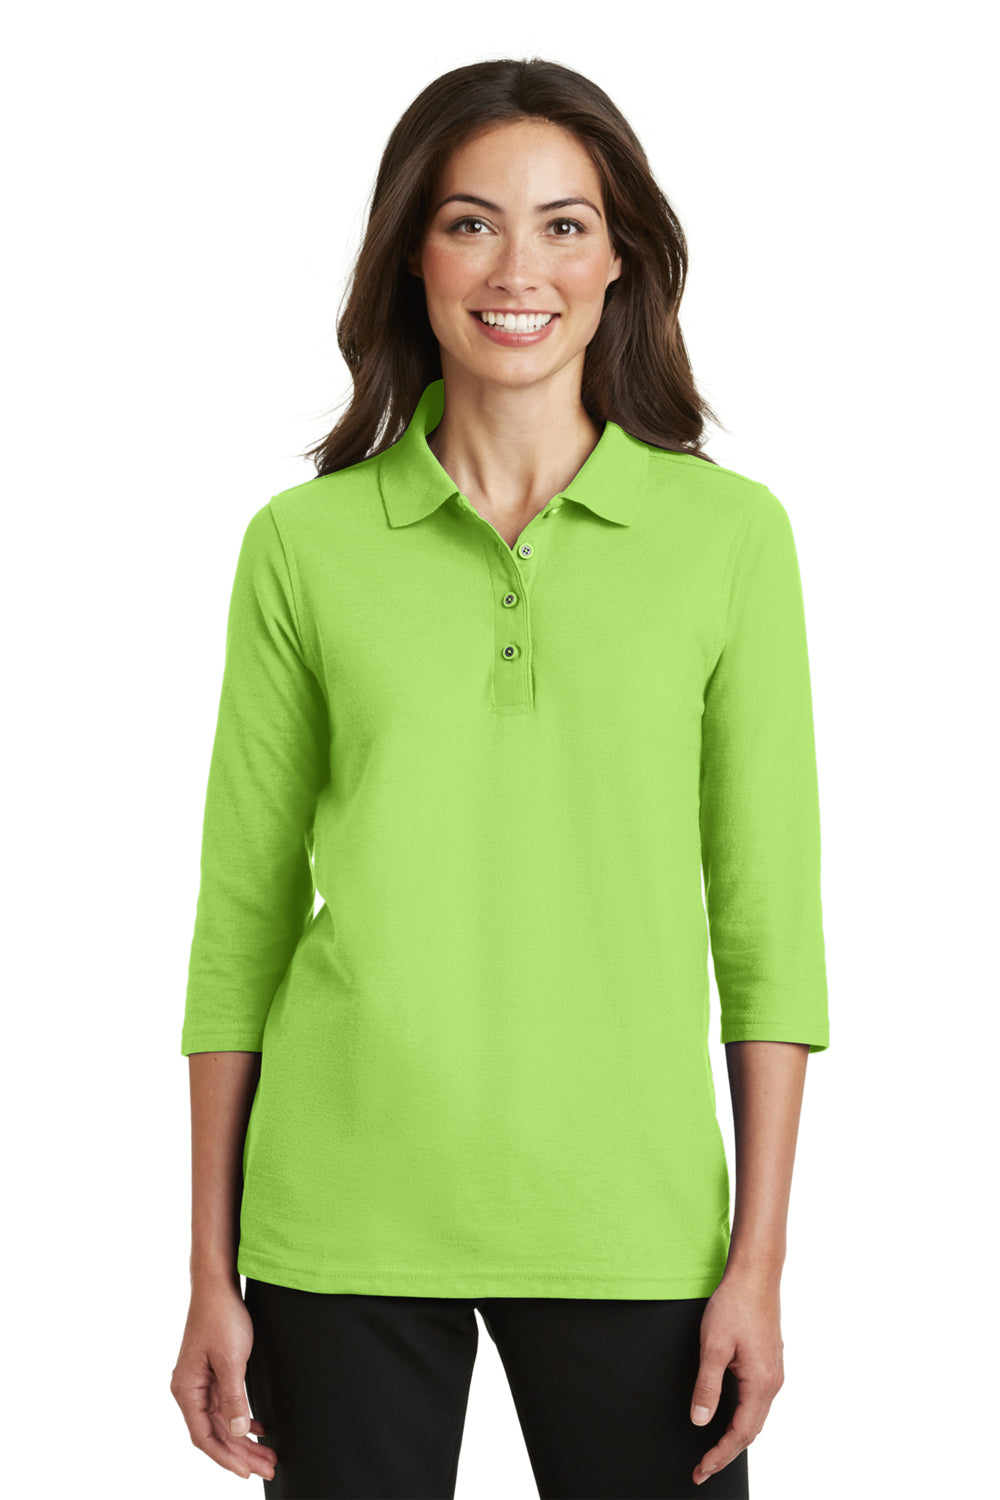 Port Authority L562 Womens Silk Touch 3/4 Sleeve Polo Shirt Lime Green Front